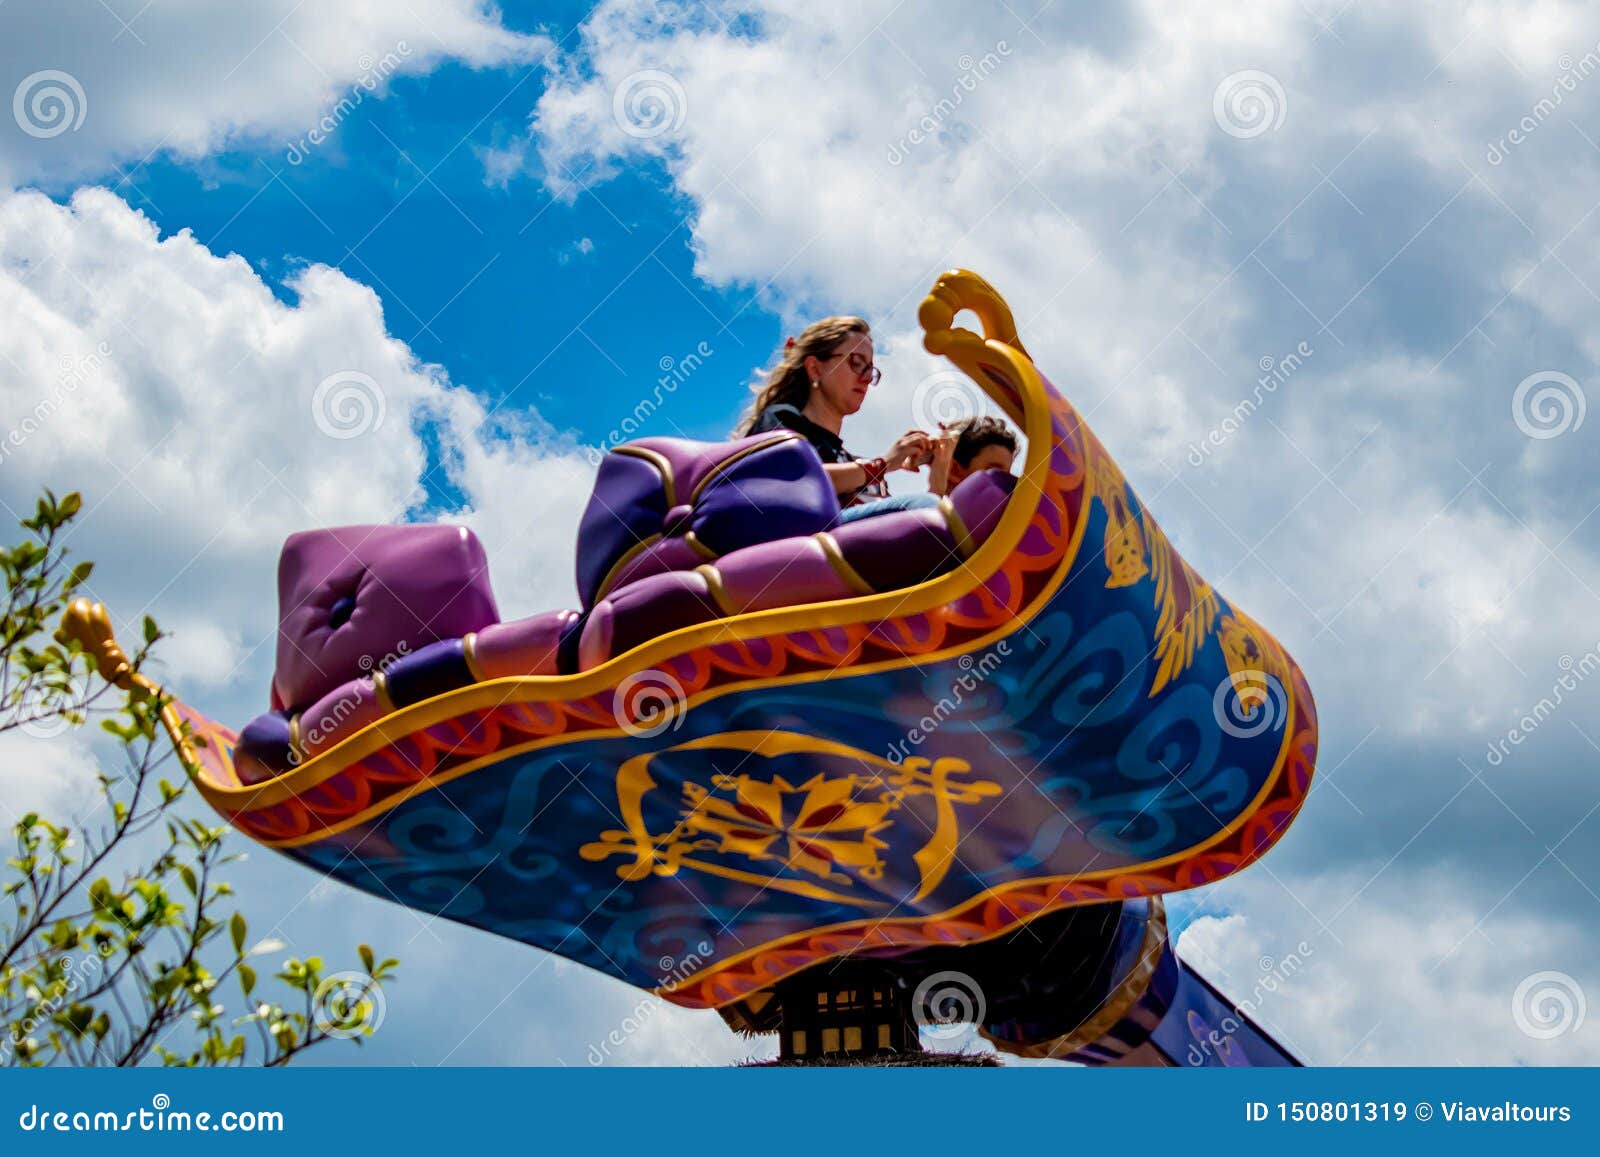 Aladdin Castle Photos Free Royalty Free Stock Photos From Dreamstime